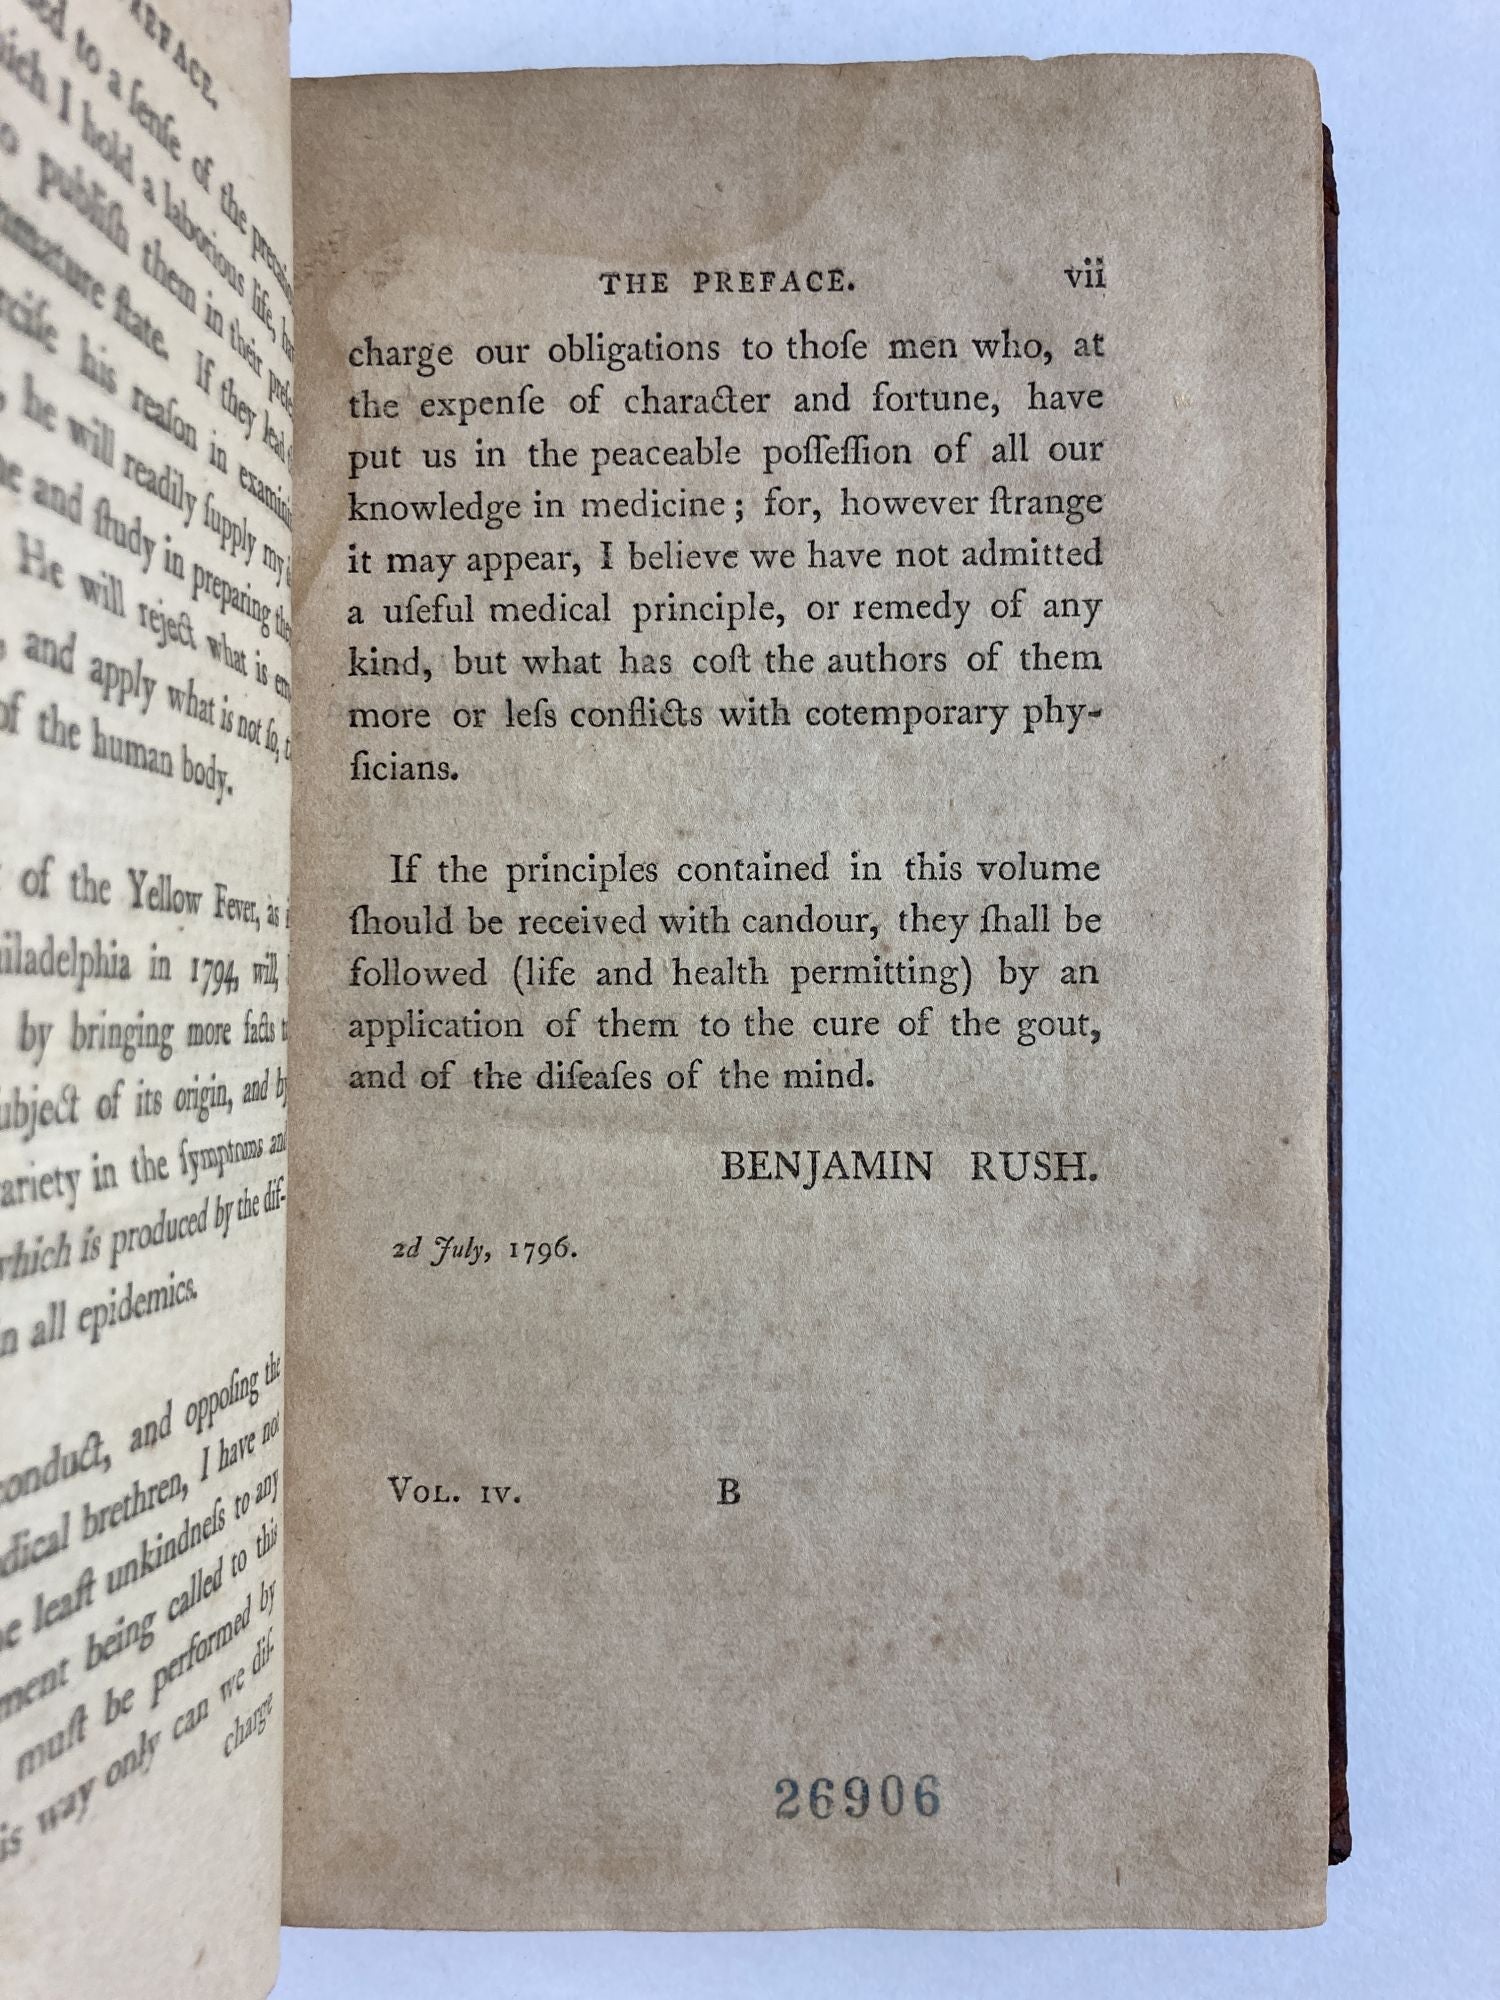 Product Image for MEDICAL INQUIRIES AND OBSERVATIONS: CONTAINING AN ACCOUNT OF THE BILIOUS REMITTING AND INTERMITTING YELLOW FEVER, AS IT APPEARED IN PHILADELPHIA IN THE YEAR 1794. TOGETHER WITH AN INQUIRY INTO THE PROXIMATE CAUSE OF FEVER; AND A DEFENCE OF BLOOD-LETTING A